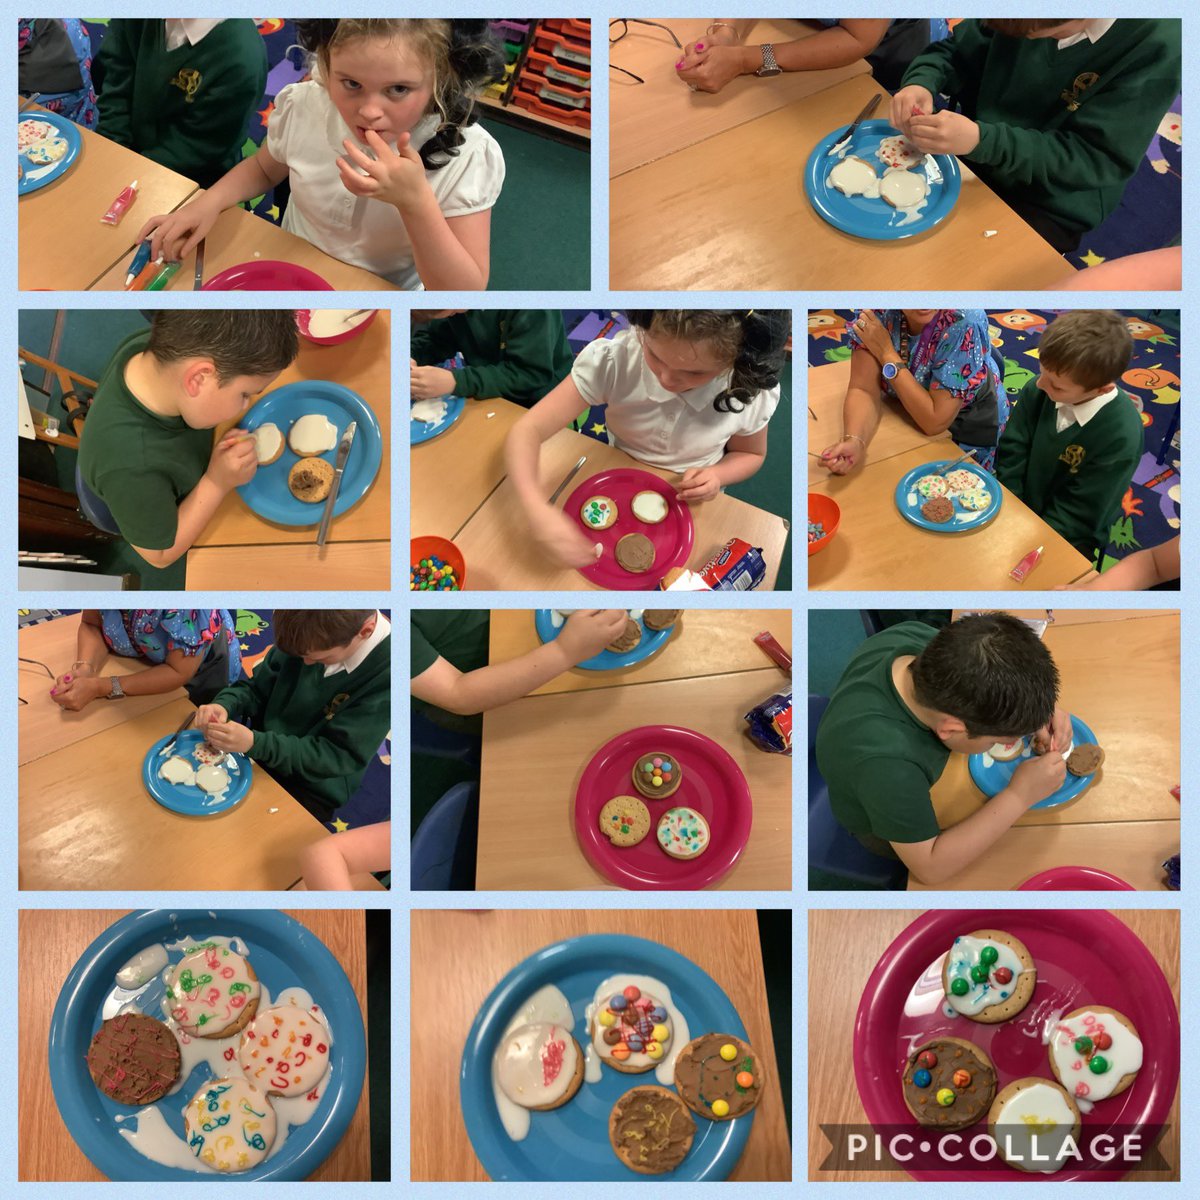 We all enjoy our weekly baking sessions. We have learned lots of special skills, techniques and recipe vocabulary. Our favourite part though is definitely the tasting! 😋